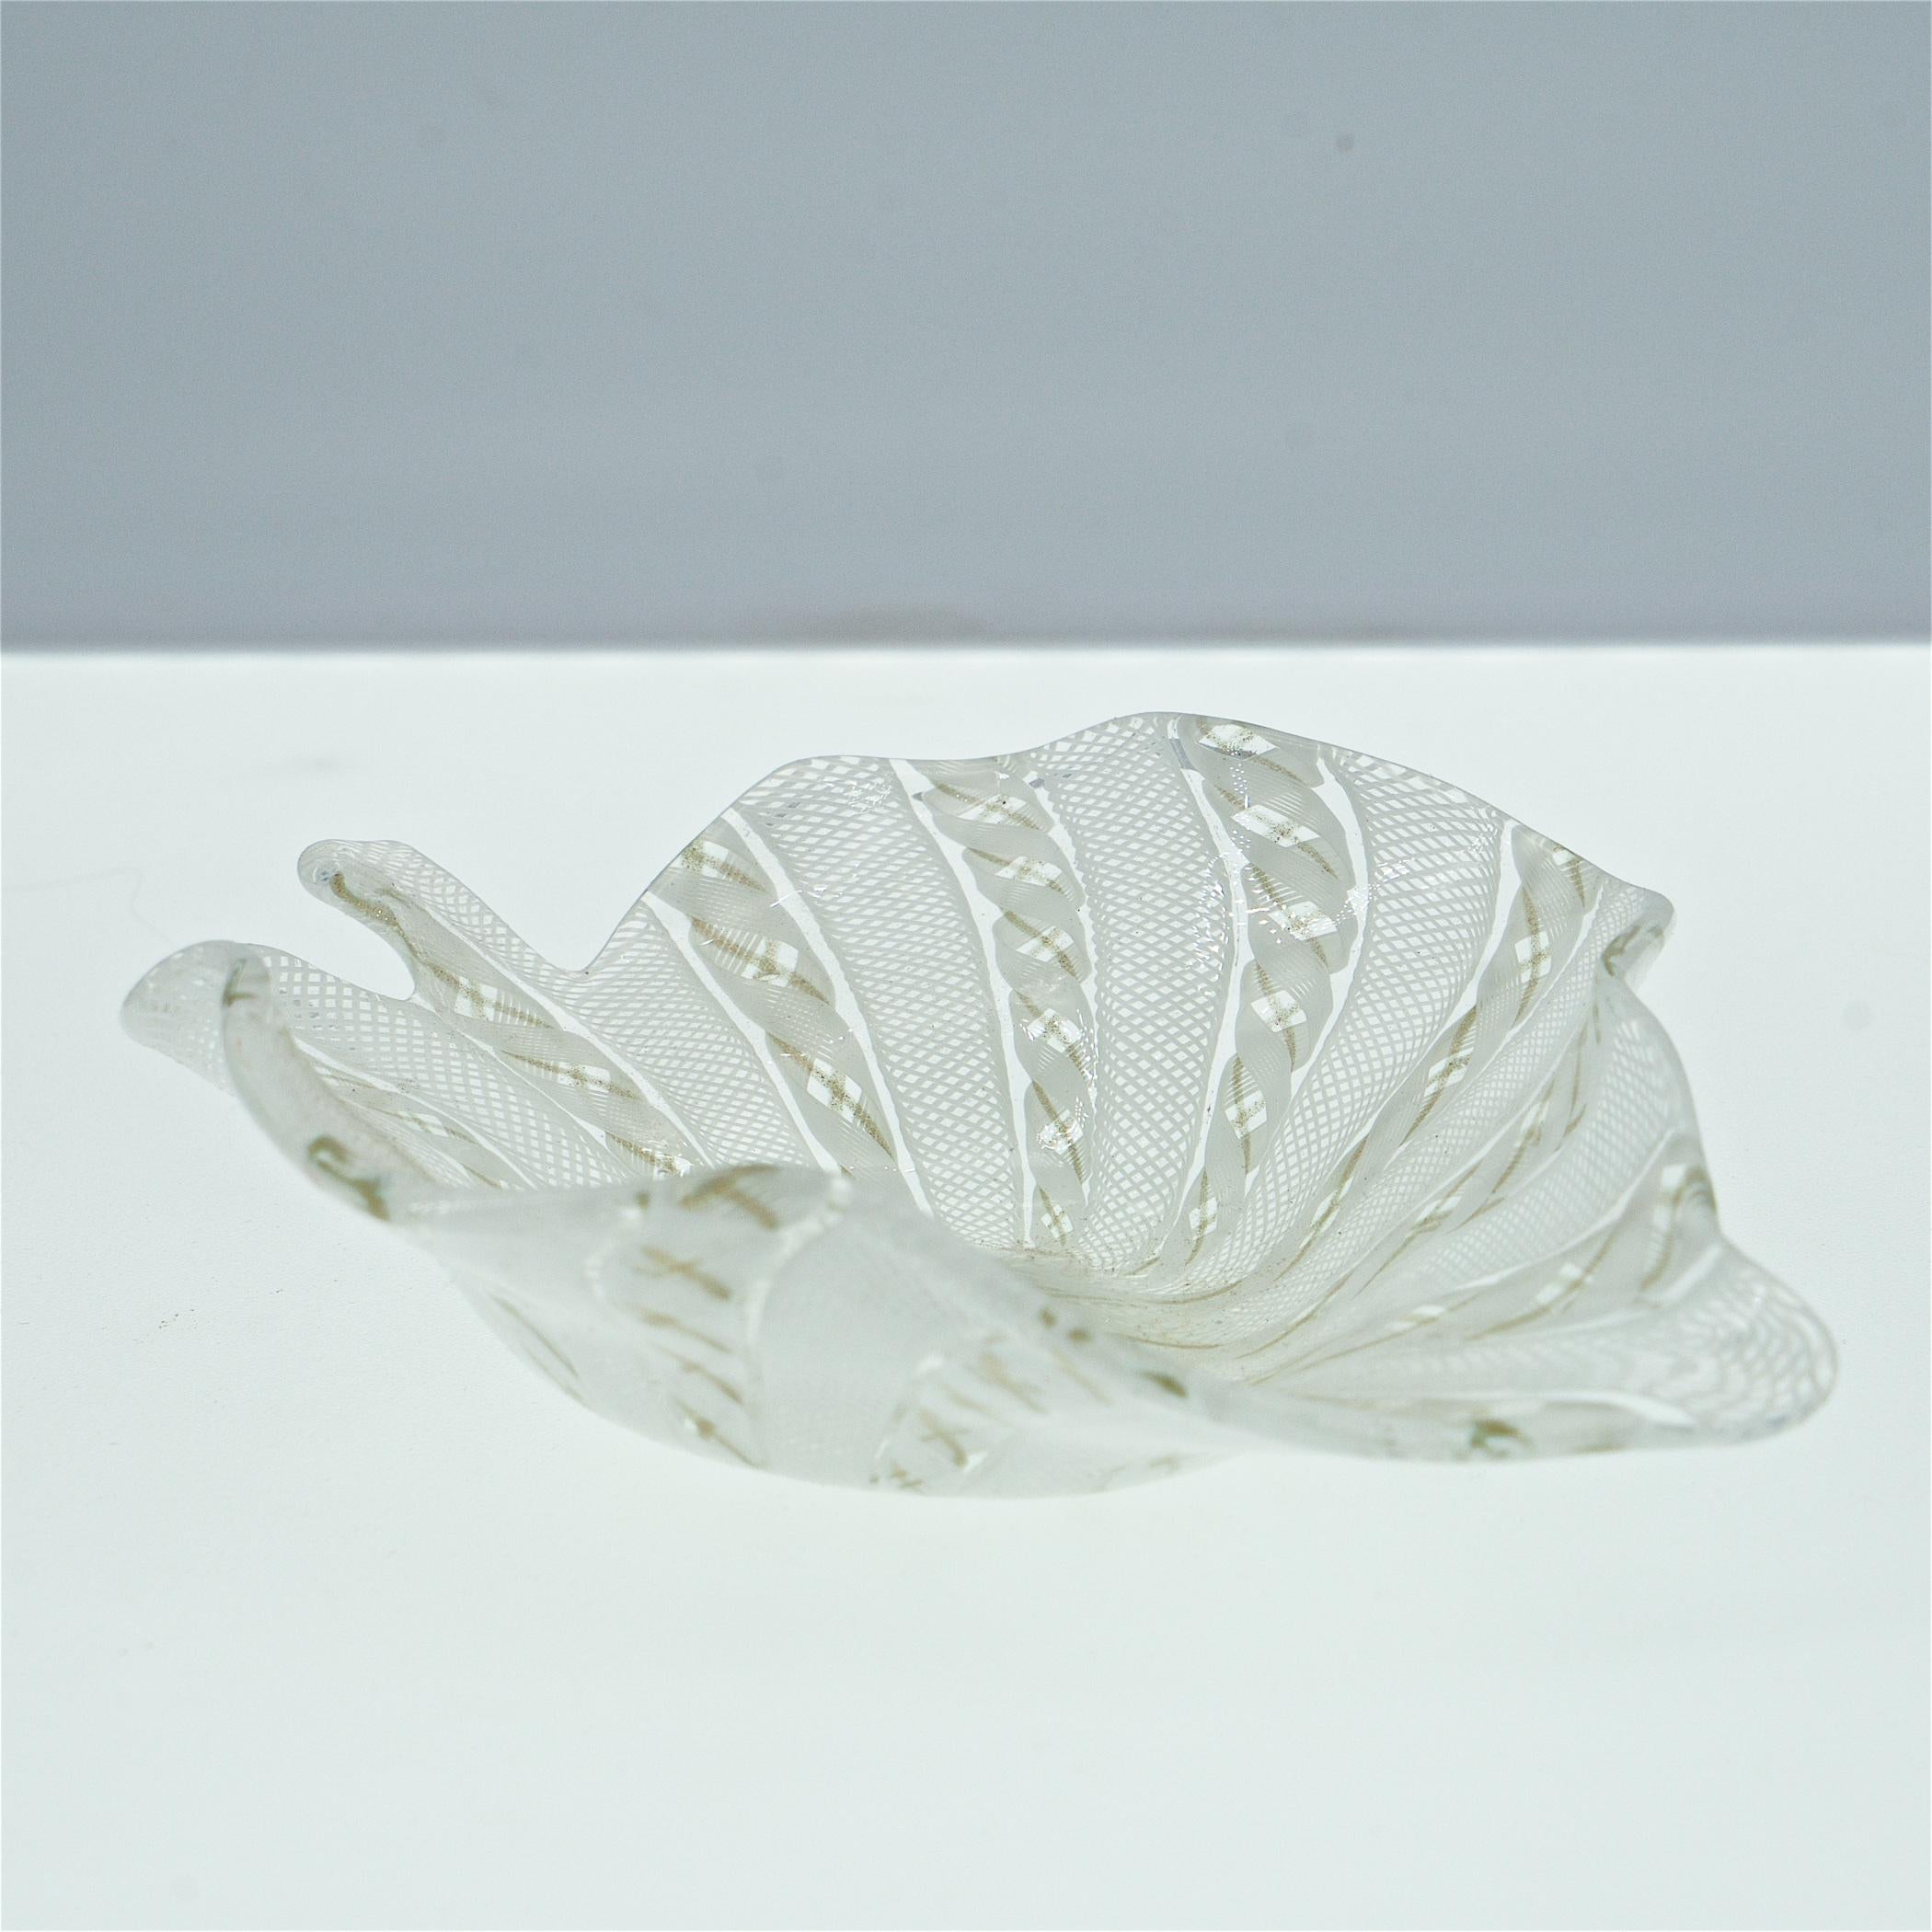 1950s Art Glass Compote Bowl Leaf Cup Set Mid-Century Venini Fratelli Toso  In Good Condition For Sale In Hyattsville, MD